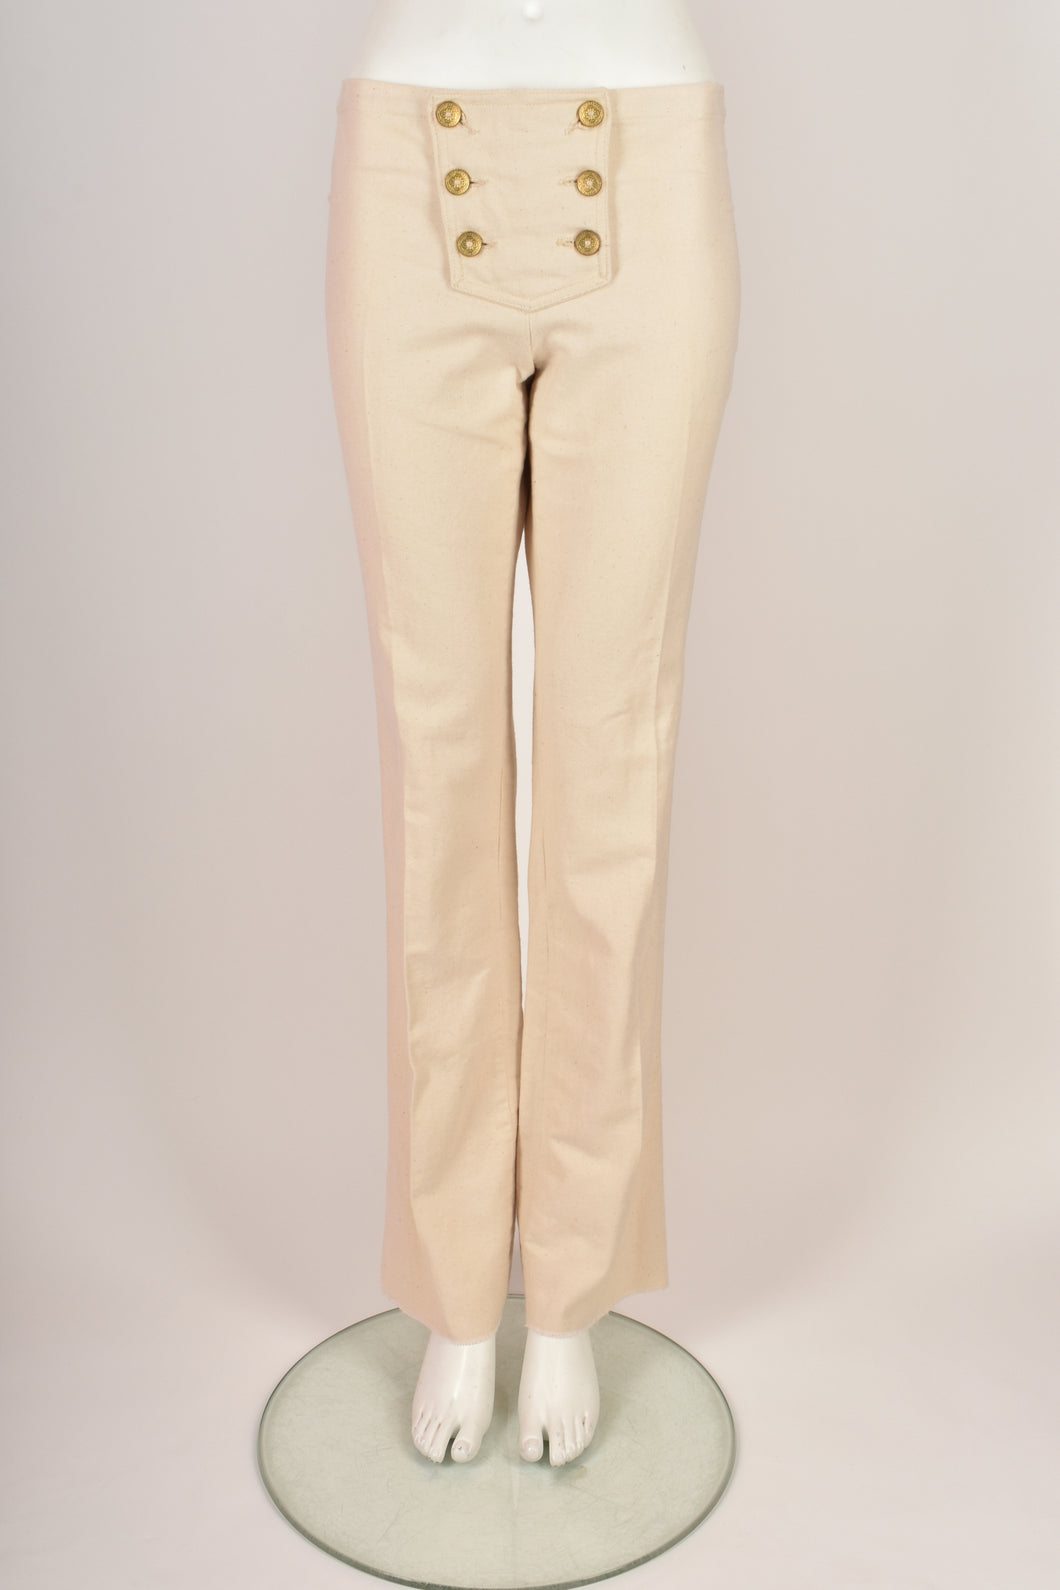 TOM 1970s NAVAL STYLE TROUSERS M